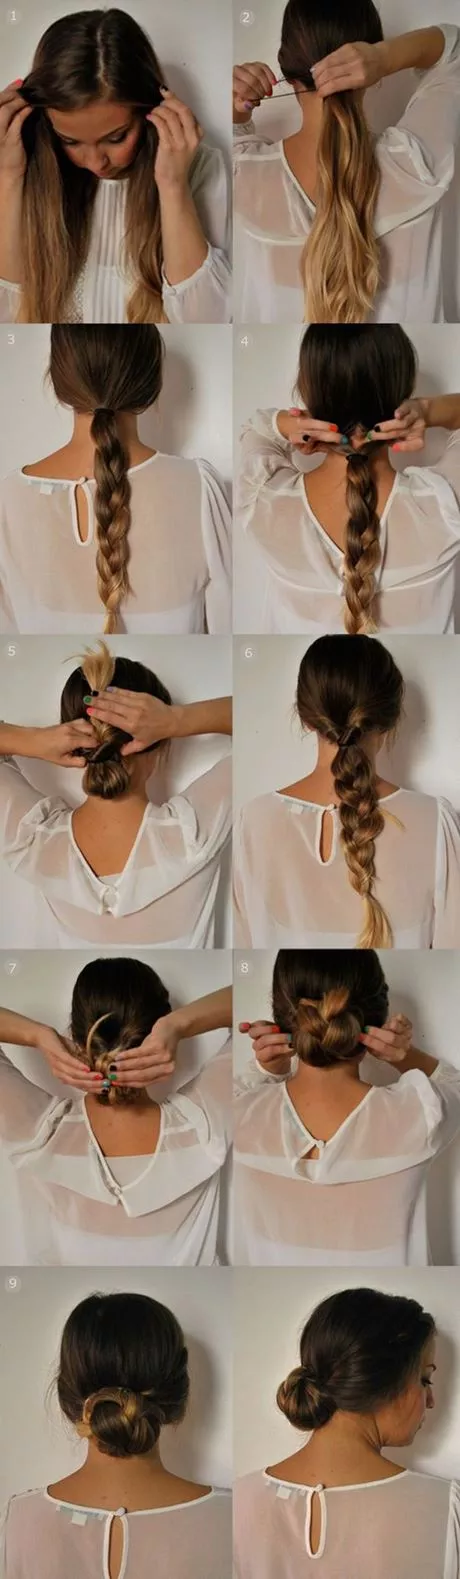 Simple but beautiful hairstyles simple-but-beautiful-hairstyles-20_18-10-10